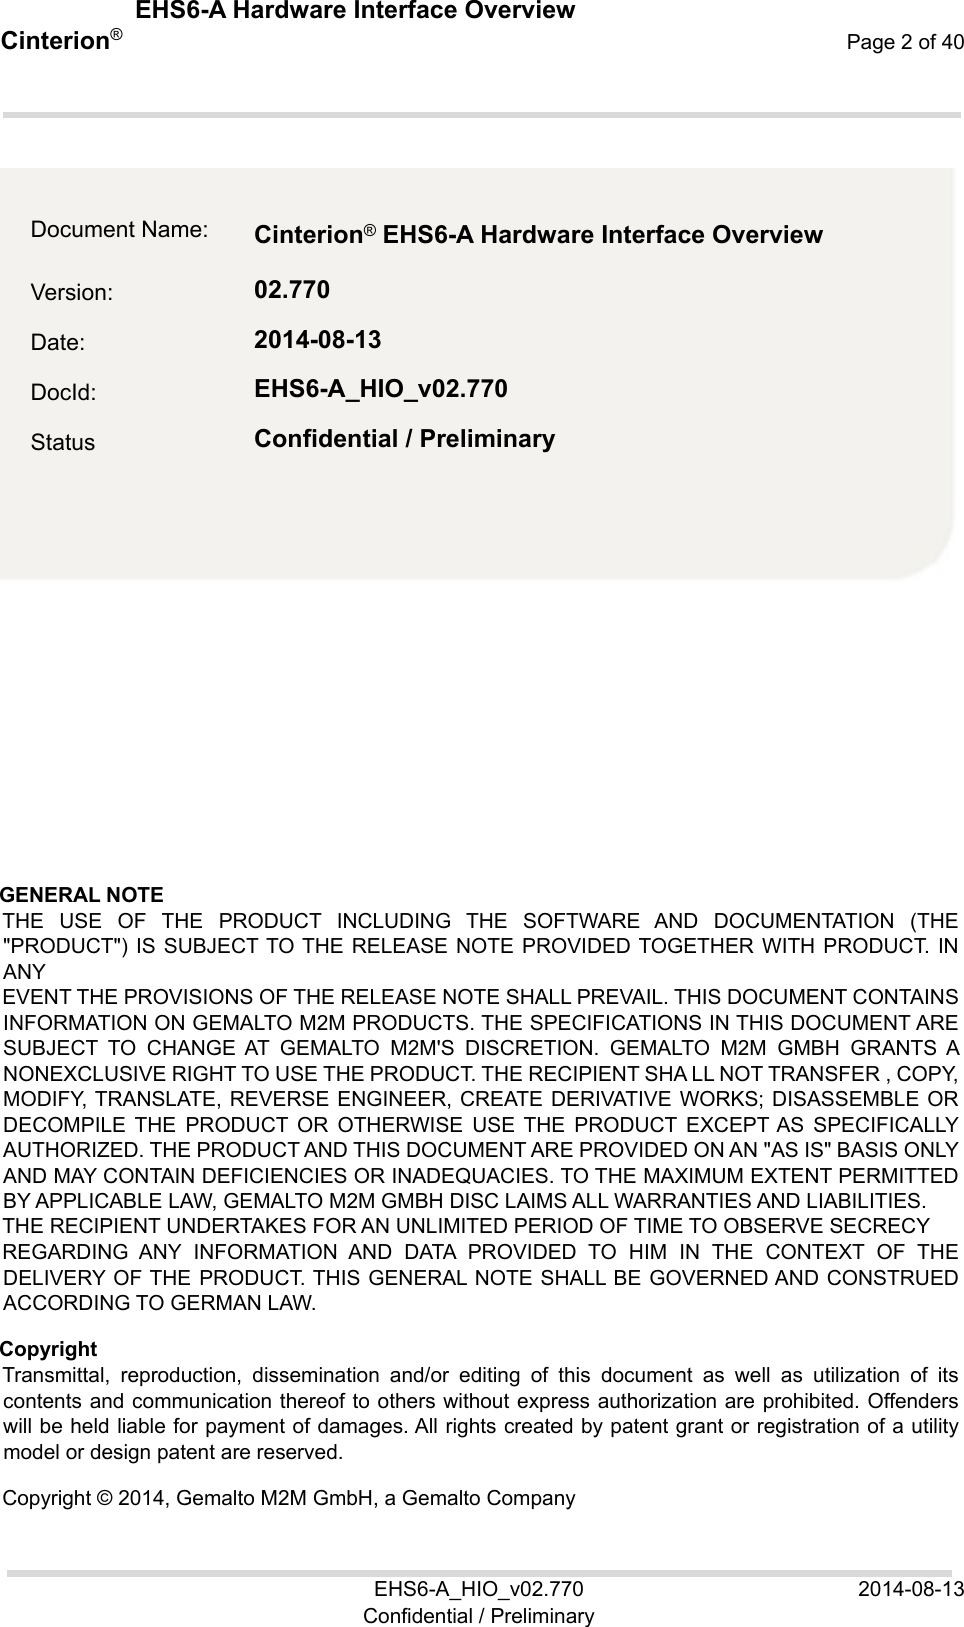  EHS6-A Hardware Interface Overview EHS6-A_HIO_v02.770  2014-08-13 Confidential / Preliminary Cinterion®  Page 2 of 40 2  GENERAL NOTE  THE  USE  OF  THE  PRODUCT  INCLUDING  THE  SOFTWARE  AND  DOCUMENTATION (THE &quot;PRODUCT&quot;) IS SUBJECT TO THE RELEASE NOTE PROVIDED TOGETHER WITH PRODUCT. IN ANY EVENT THE PROVISIONS OF THE RELEASE NOTE SHALL PREVAIL. THIS DOCUMENT CONTAINS INFORMATION ON GEMALTO M2M PRODUCTS. THE SPECIFICATIONS IN THIS DOCUMENT ARE SUBJECT  TO  CHANGE  AT  GEMALTO  M2M&apos;S  DISCRETION.  GEMALTO  M2M  GMBH GRANTS A NONEXCLUSIVE RIGHT TO USE THE PRODUCT. THE RECIPIENT SHA LL NOT TRANSFER , COPY, MODIFY, TRANSLATE, REVERSE ENGINEER, CREATE  DERIVATIVE WORKS; DISASSEMBLE OR DECOMPILE  THE  PRODUCT  OR  OTHERWISE  USE  THE  PRODUCT  EXCEPT AS  SPECIFICALLY AUTHORIZED. THE PRODUCT AND THIS DOCUMENT ARE PROVIDED ON AN &quot;AS IS&quot; BASIS ONLY AND MAY CONTAIN DEFICIENCIES OR INADEQUACIES. TO THE MAXIMUM EXTENT PERMITTED BY APPLICABLE LAW, GEMALTO M2M GMBH DISC LAIMS ALL WARRANTIES AND LIABILITIES. THE RECIPIENT UNDERTAKES FOR AN UNLIMITED PERIOD OF TIME TO OBSERVE SECRECY REGARDING  ANY  INFORMATION  AND  DATA  PROVIDED  TO  HIM  IN  THE  CONTEXT  OF  THE DELIVERY OF THE  PRODUCT. THIS GENERAL  NOTE SHALL  BE GOVERNED AND CONSTRUED ACCORDING TO GERMAN LAW. Copyright Transmittal,  reproduction,  dissemination  and/or  editing  of  this  document  as  well  as  utilization  of  its contents and communication thereof to others without express authorization are prohibited. Offenders will be held liable for payment of damages. All rights created by patent grant or registration of a utility model or design patent are reserved.  Copyright © 2014, Gemalto M2M GmbH, a Gemalto Company Document Name:  Cinterion ® EHS6-A Hardware Interface Overview   Version:  02.770 Date:  2014-08-13 DocId:  EHS6-A_HIO_v02.770 Status  Confidential / Preliminary 